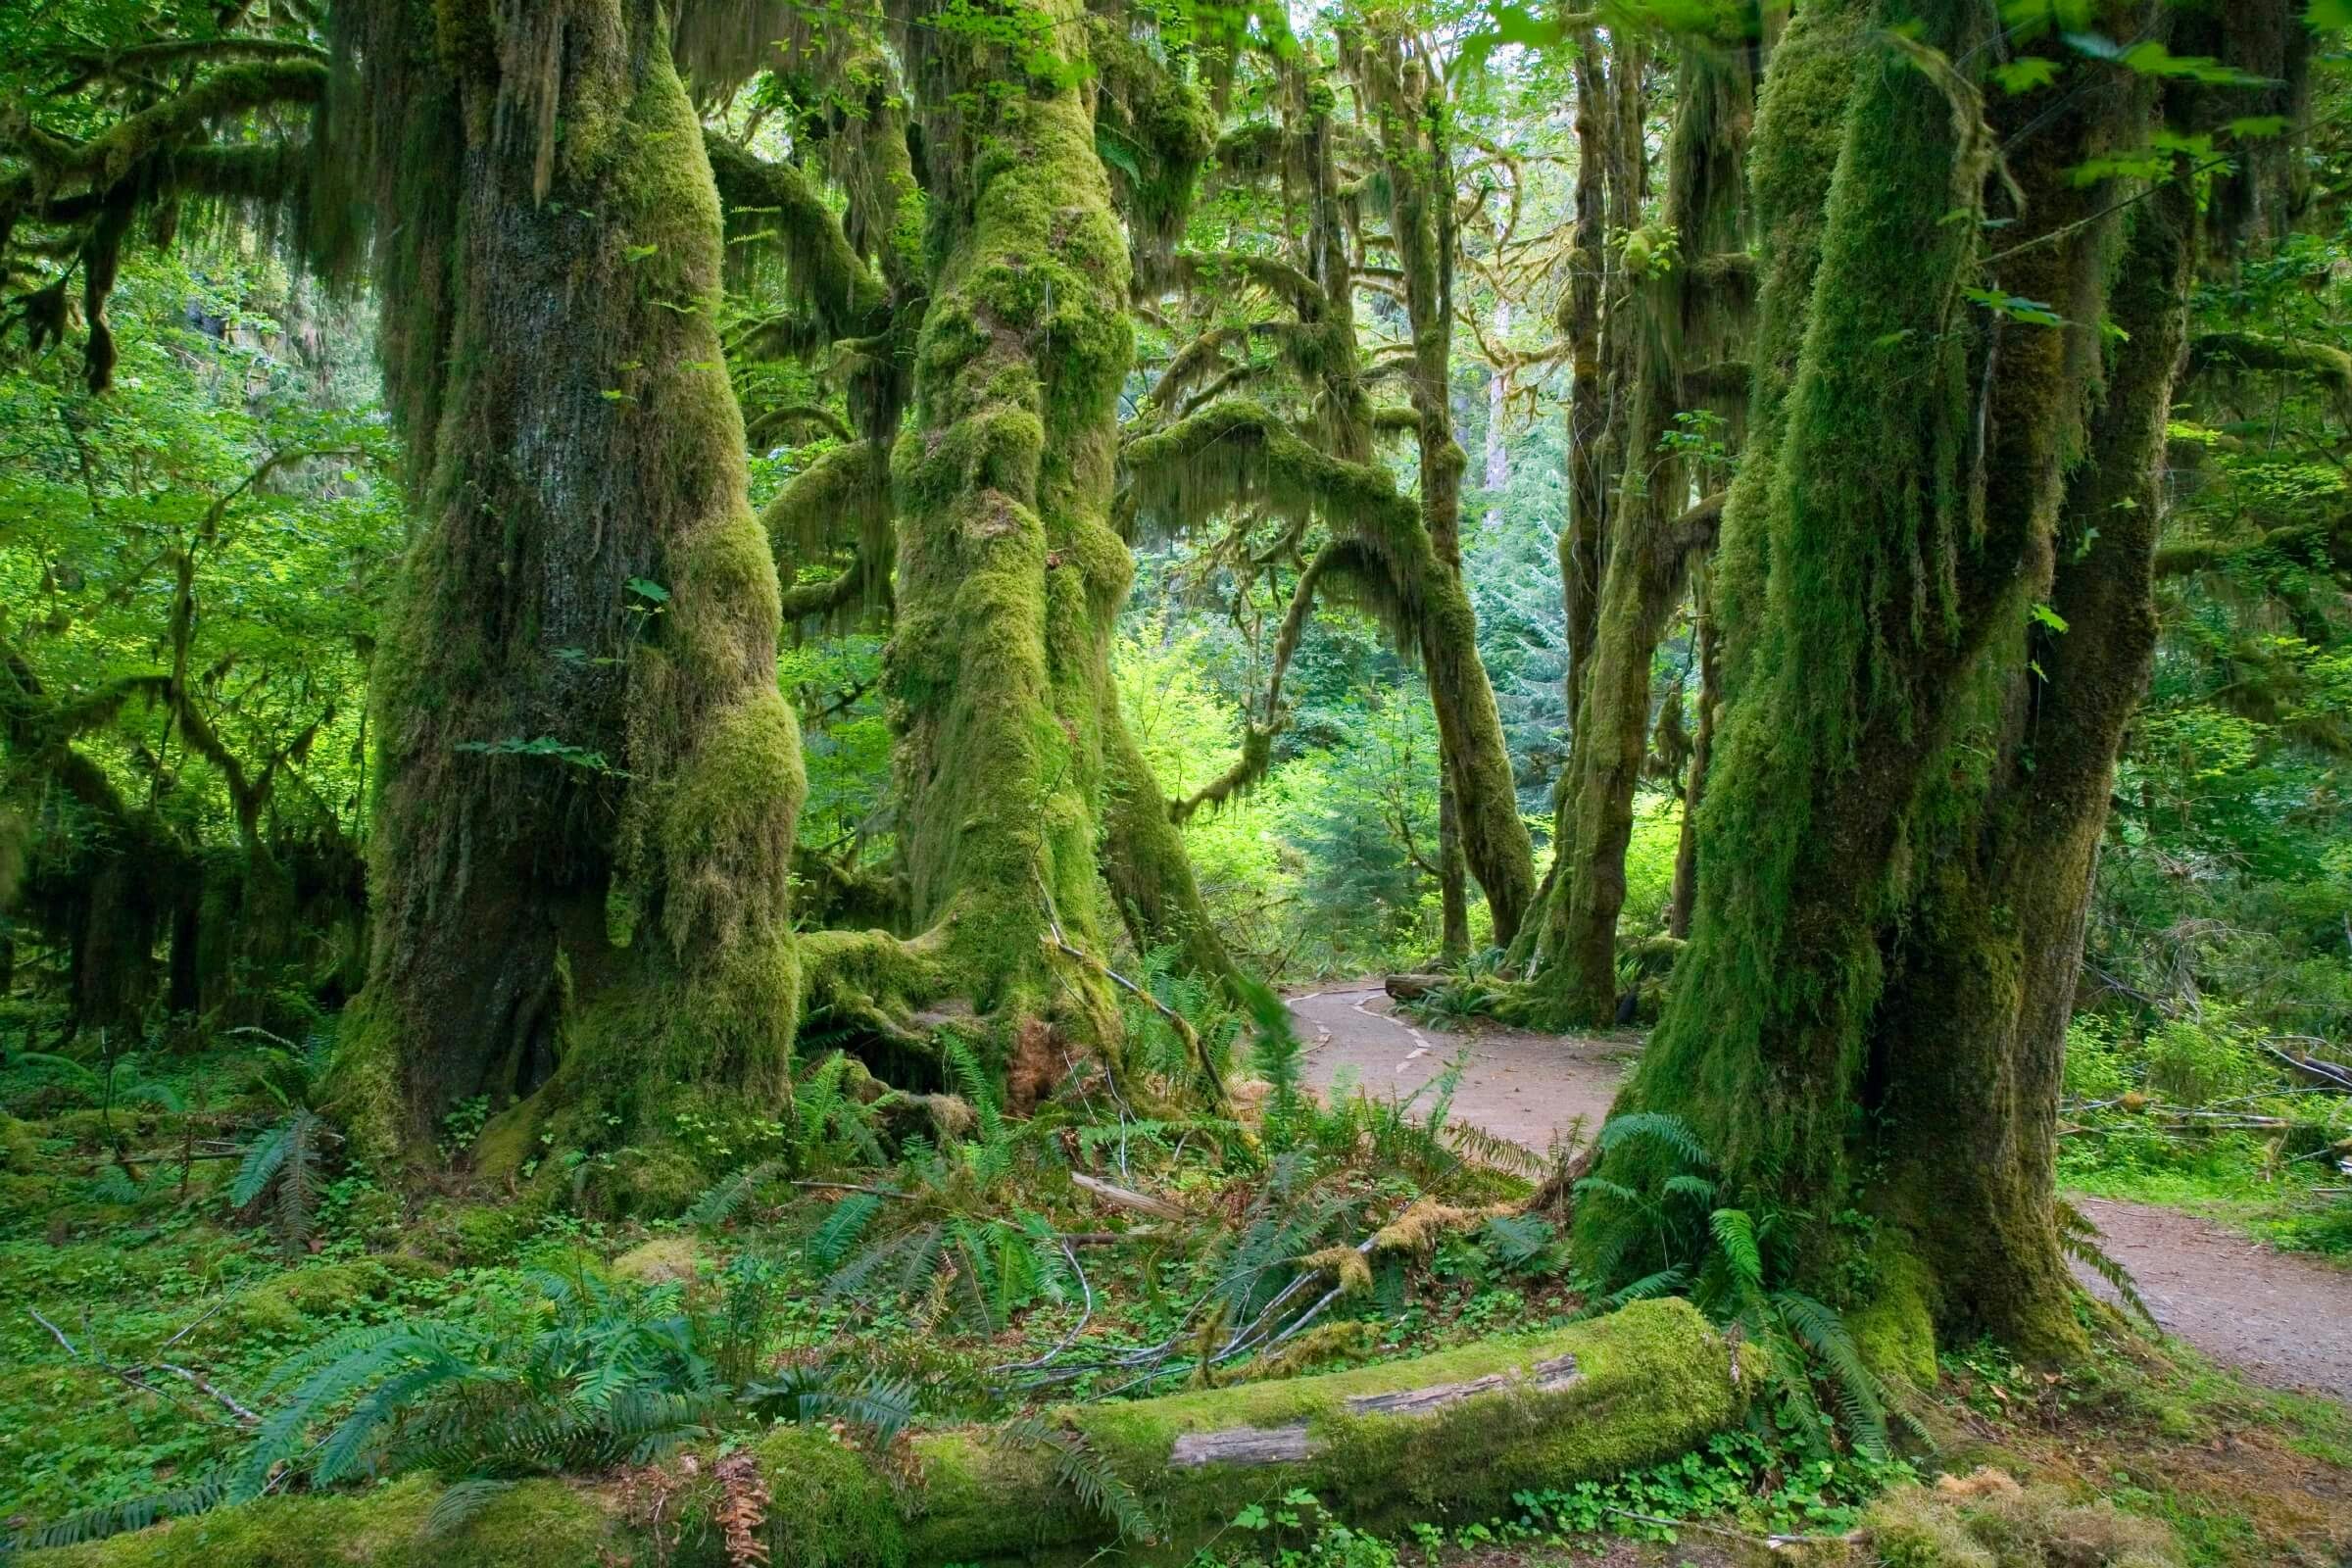 Travel News - olympic national park quiet place